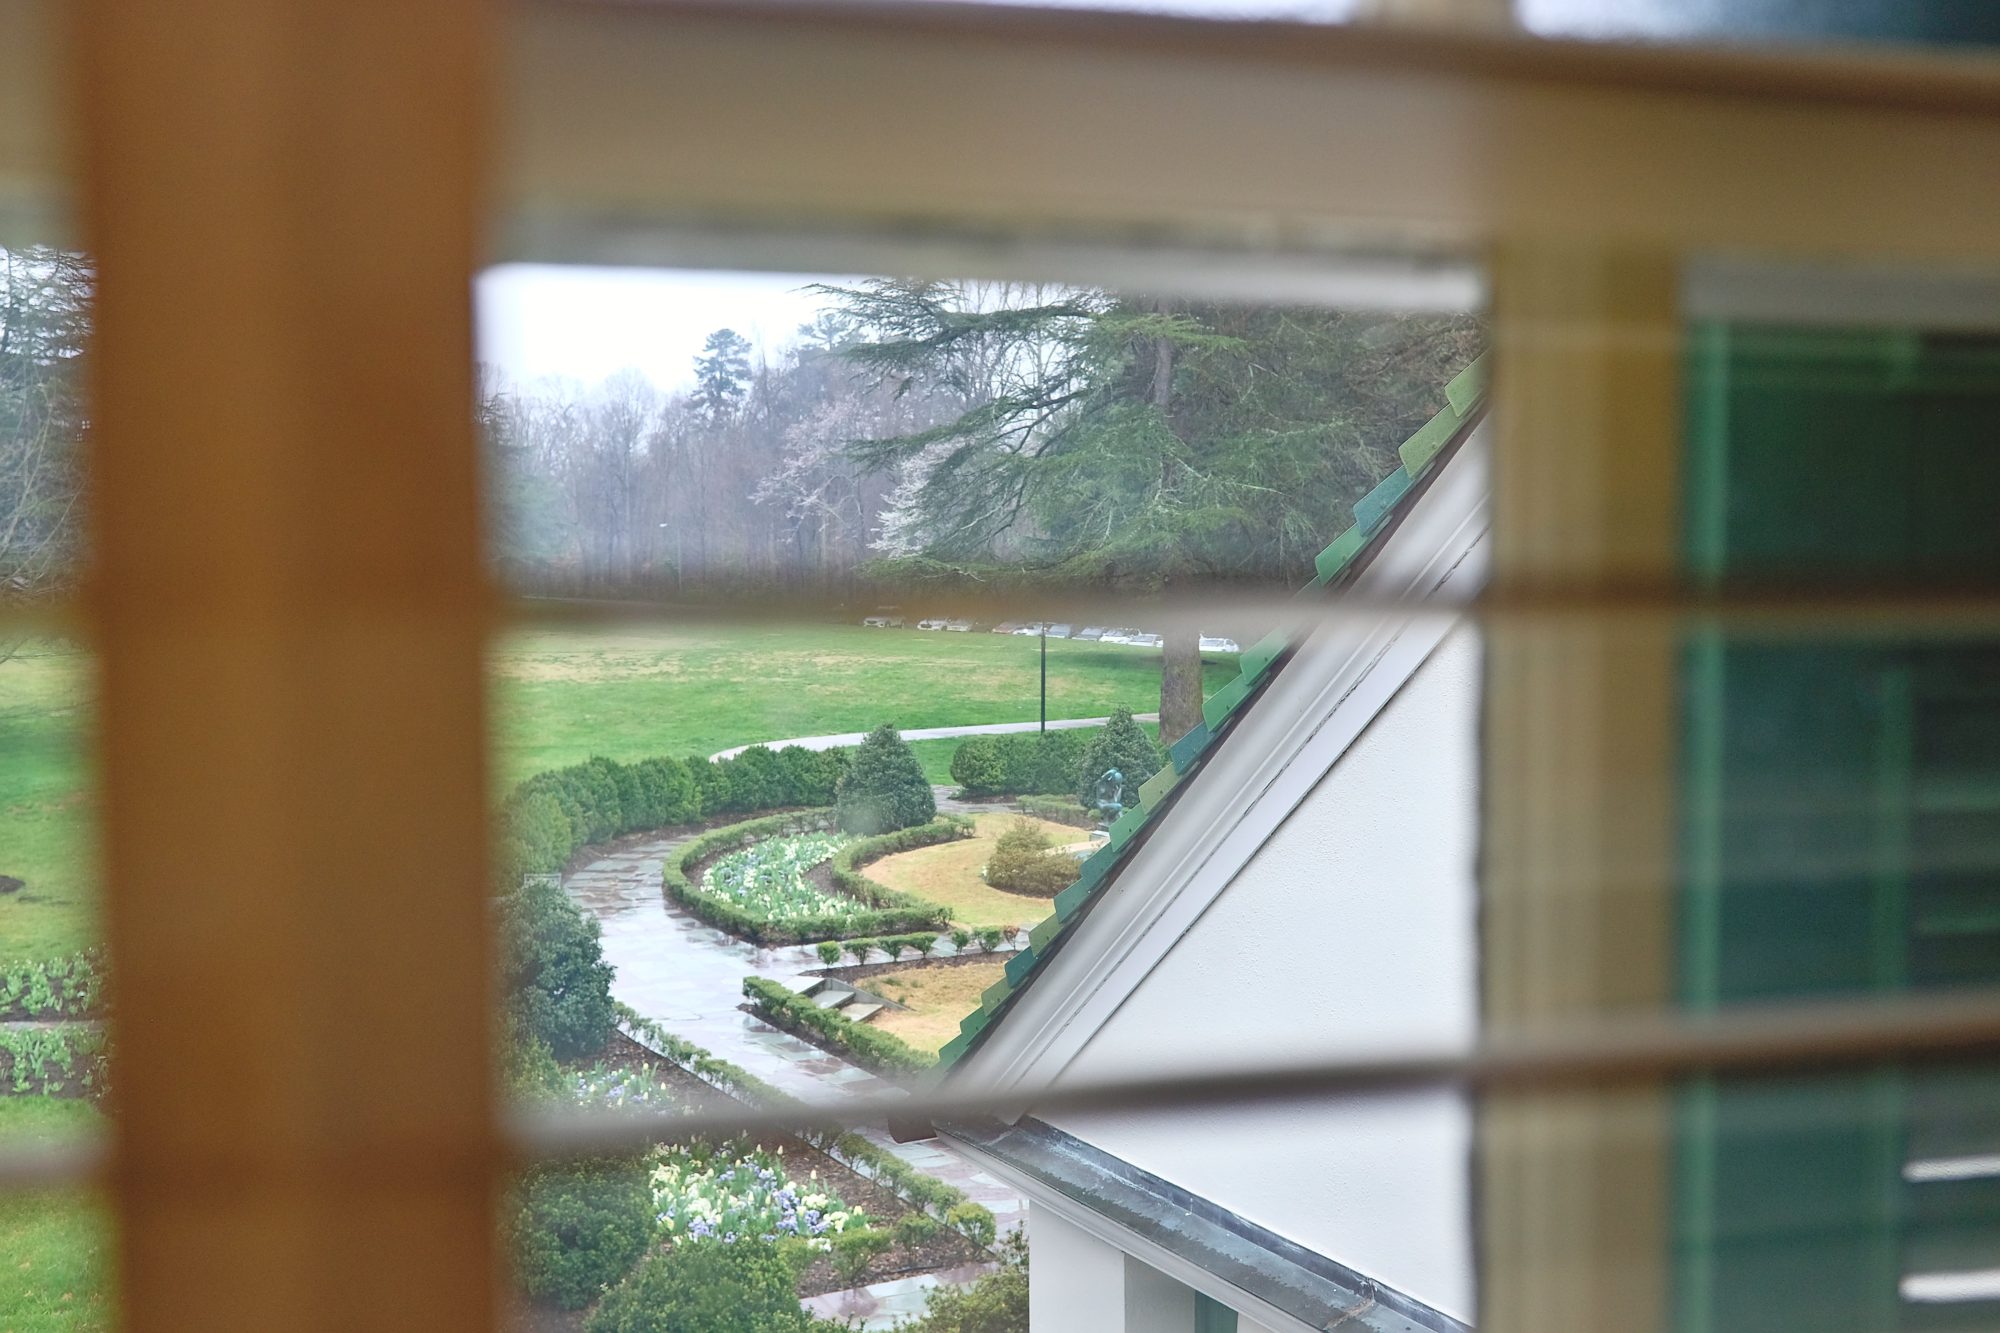 The grounds of Reynolda House are visible through interior blinds